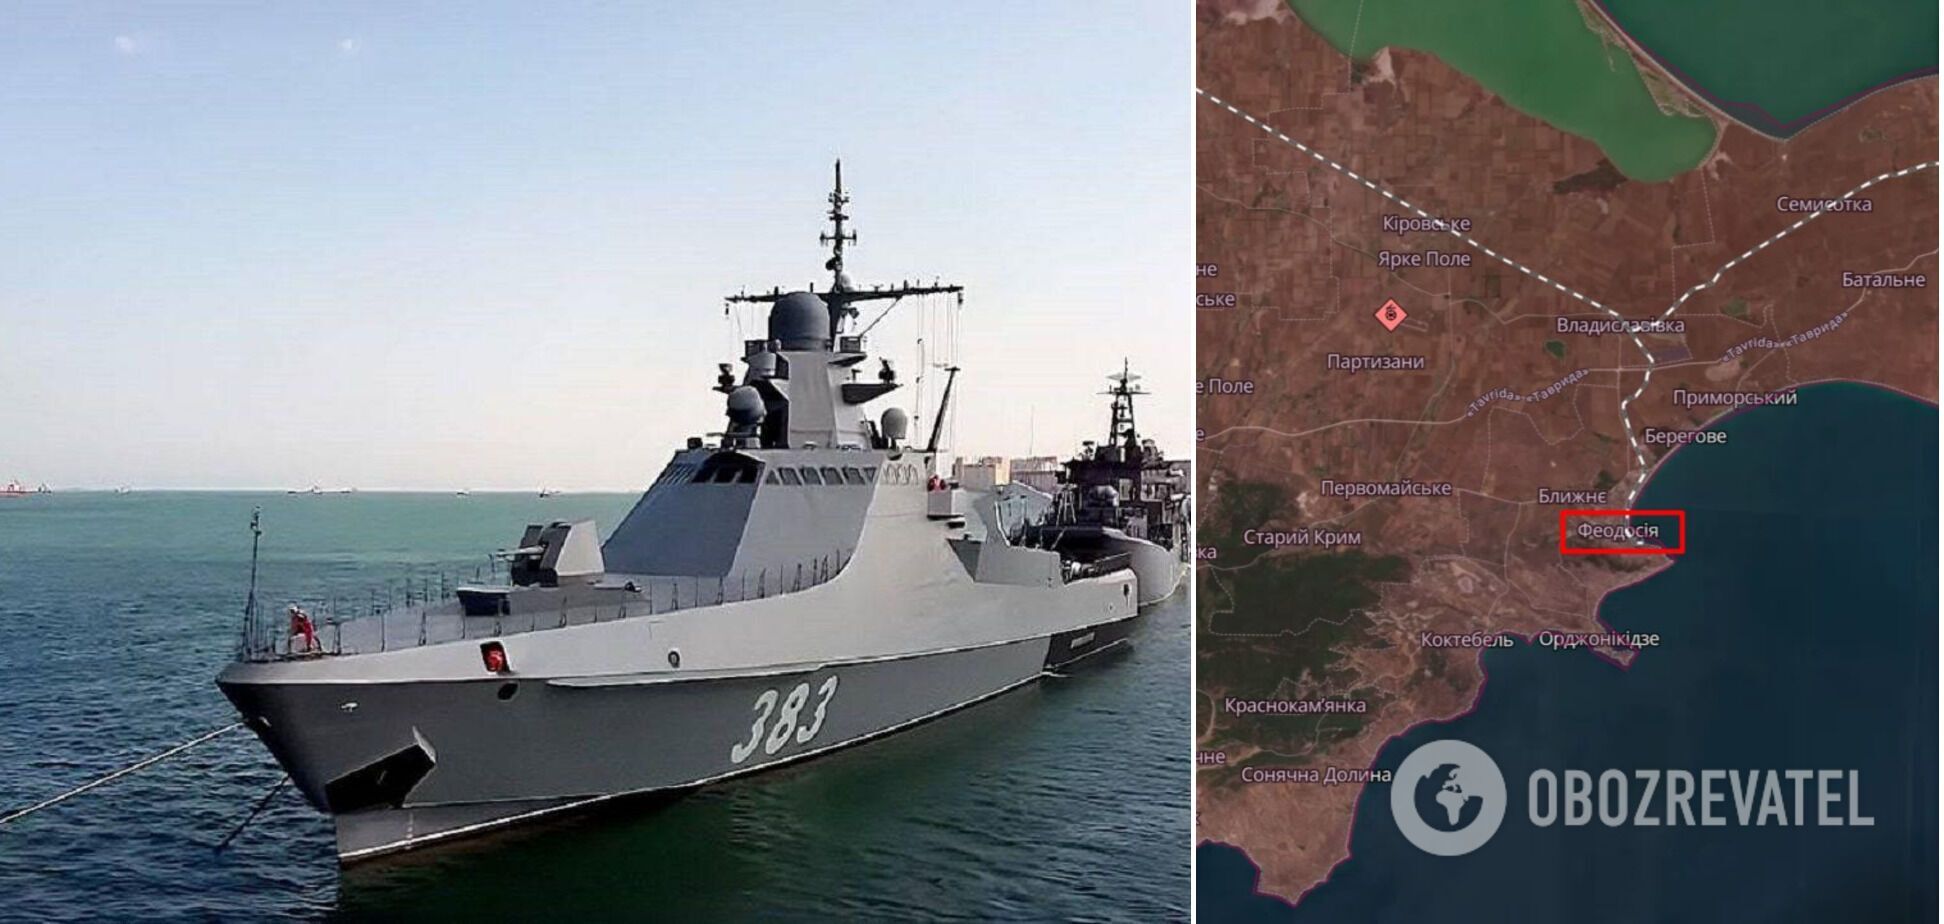 Joined underwater forces: DIU confirms destruction of Russian Sergei Kotov patrol ship during recent attack on Crimea